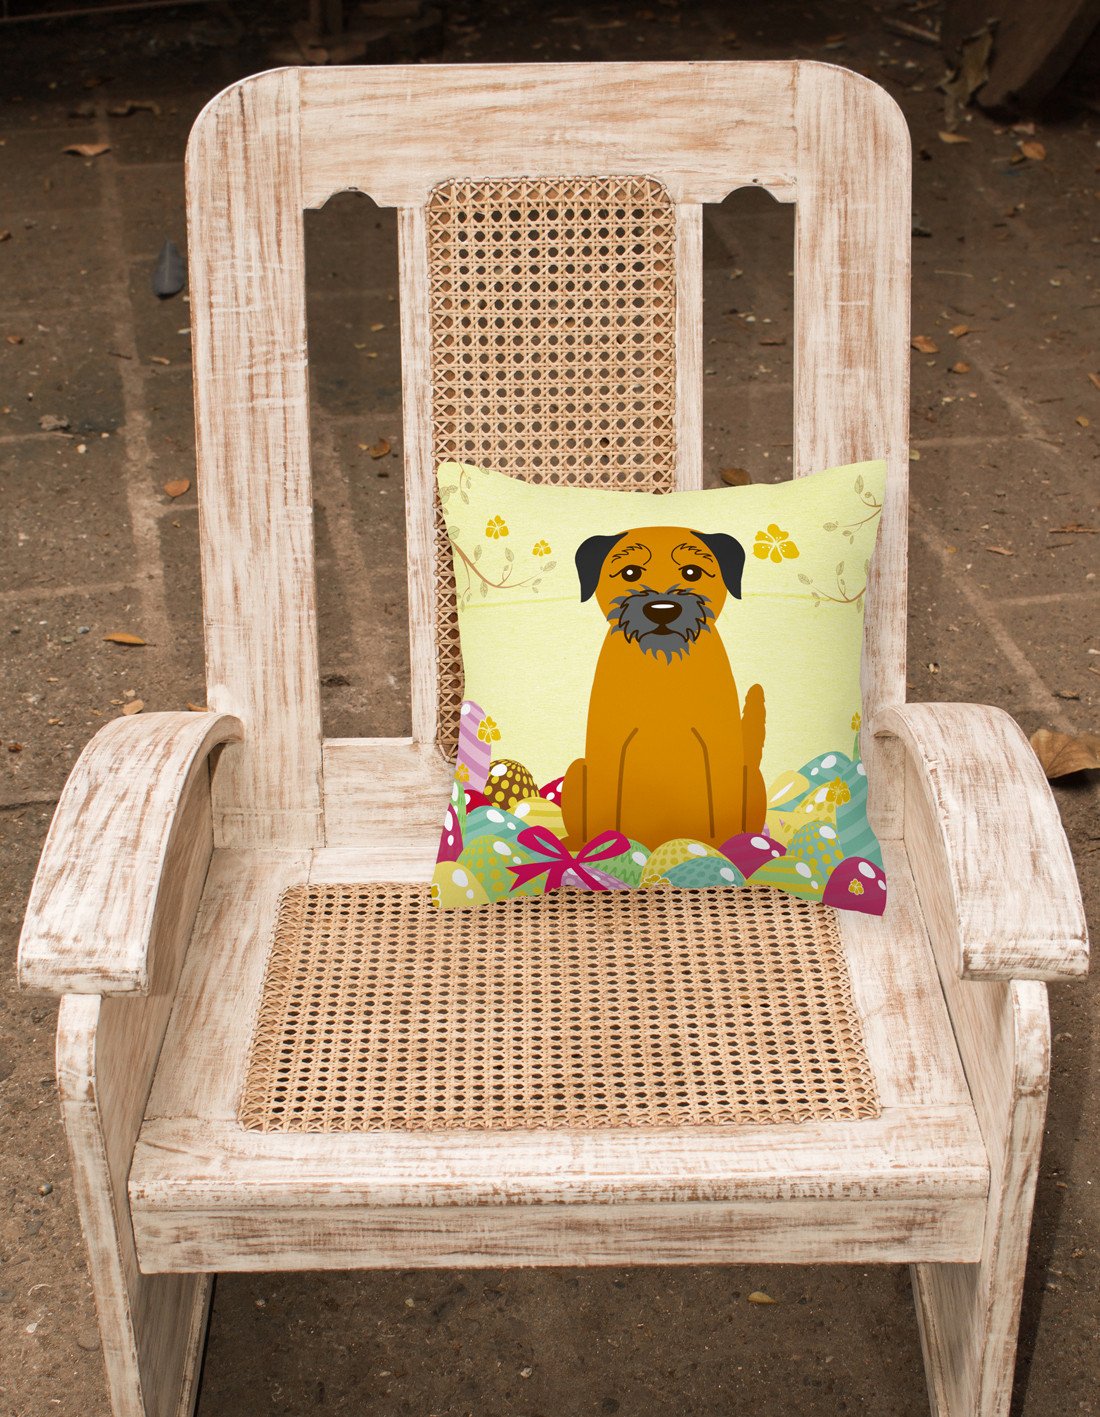 Easter Eggs Border Terrier Fabric Decorative Pillow BB6039PW1818 by Caroline's Treasures